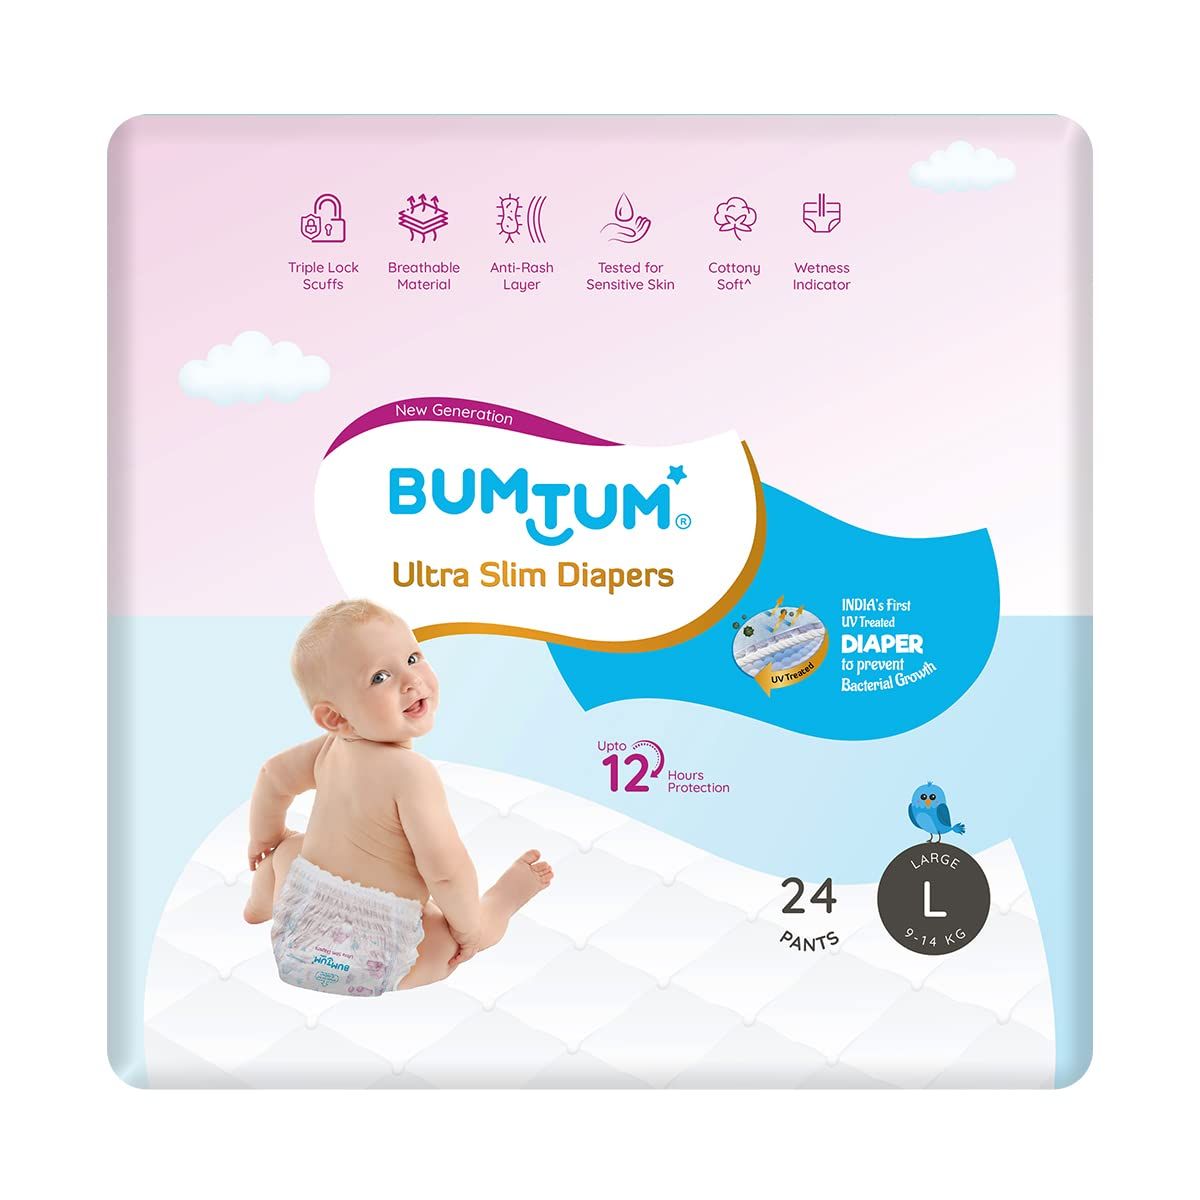 Bumtum Bumtum Baby Diaper Pants with Double Layer Leakage Protection  12  to 18 Kg 108 Count XLarge Pack of 2